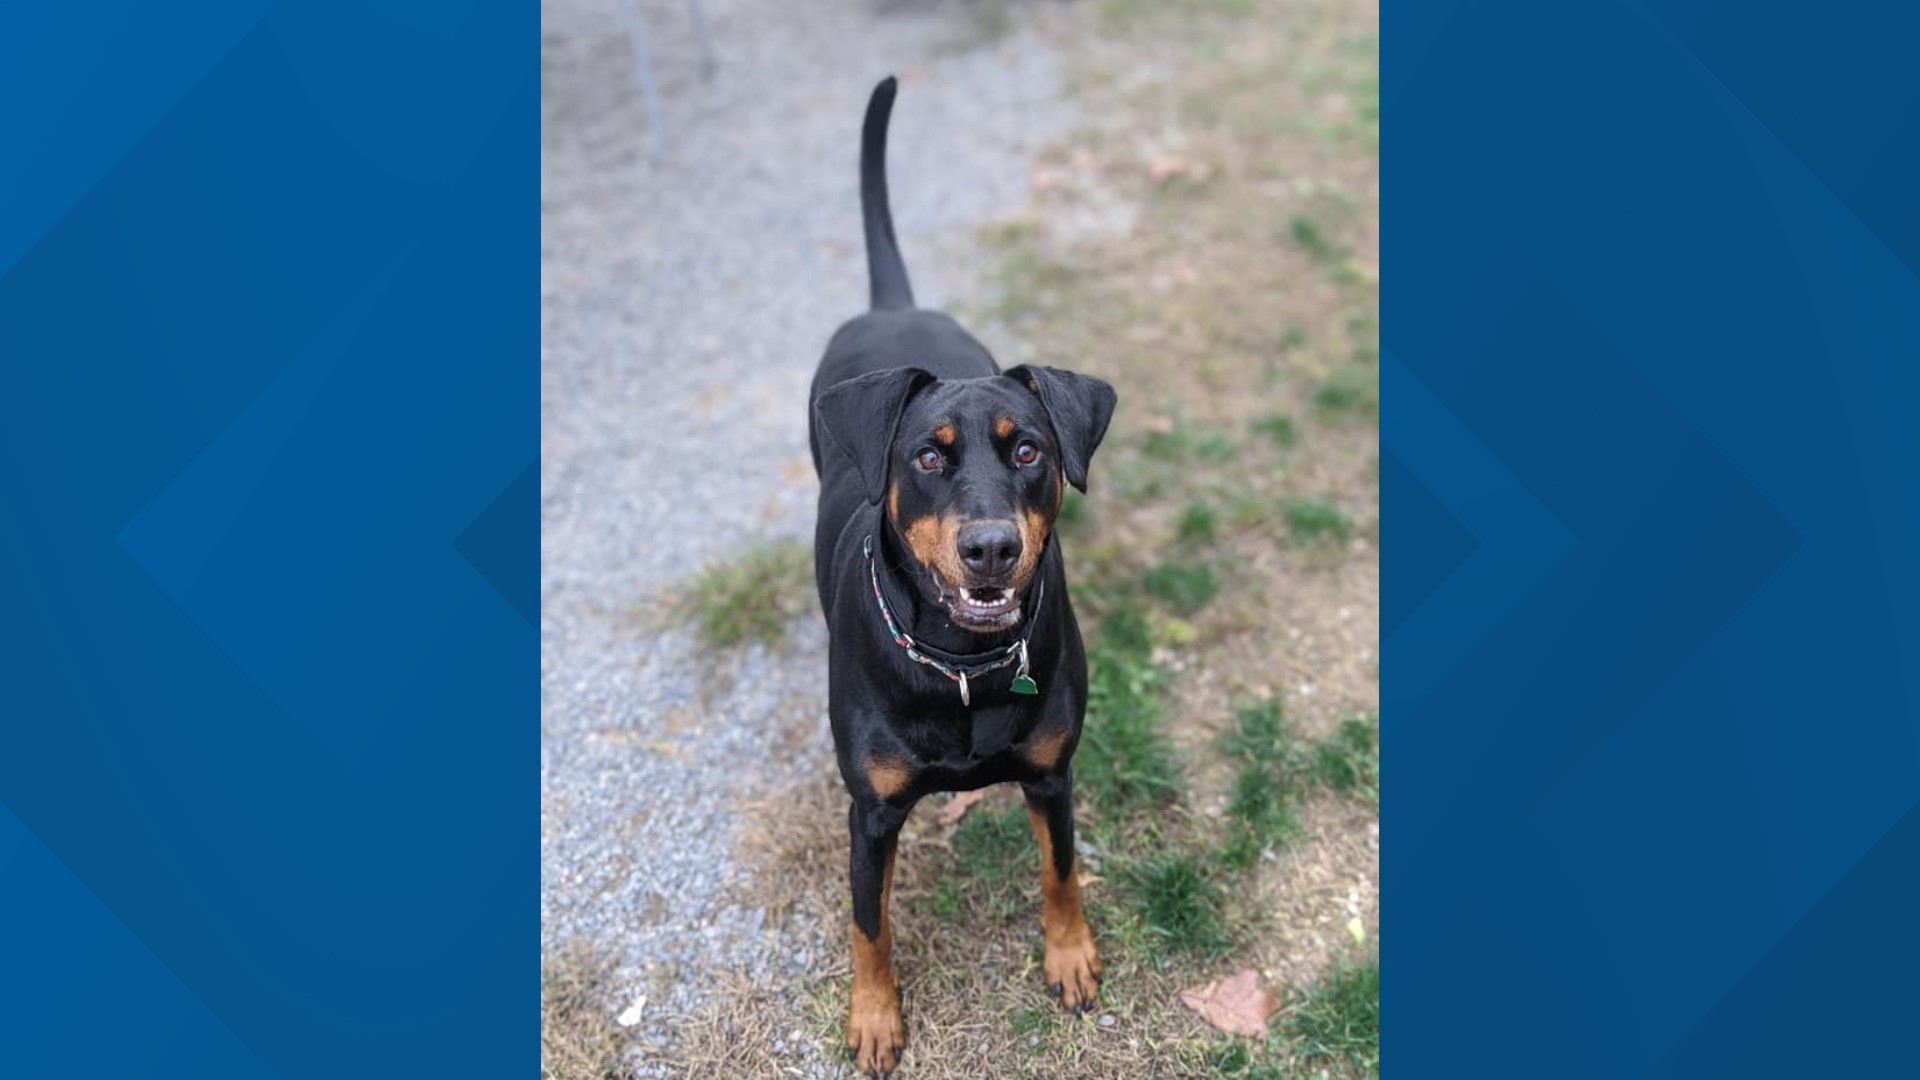 Indi, also known as Indiana Jones, is an adult Doberman Pinscher looking for his forever home.